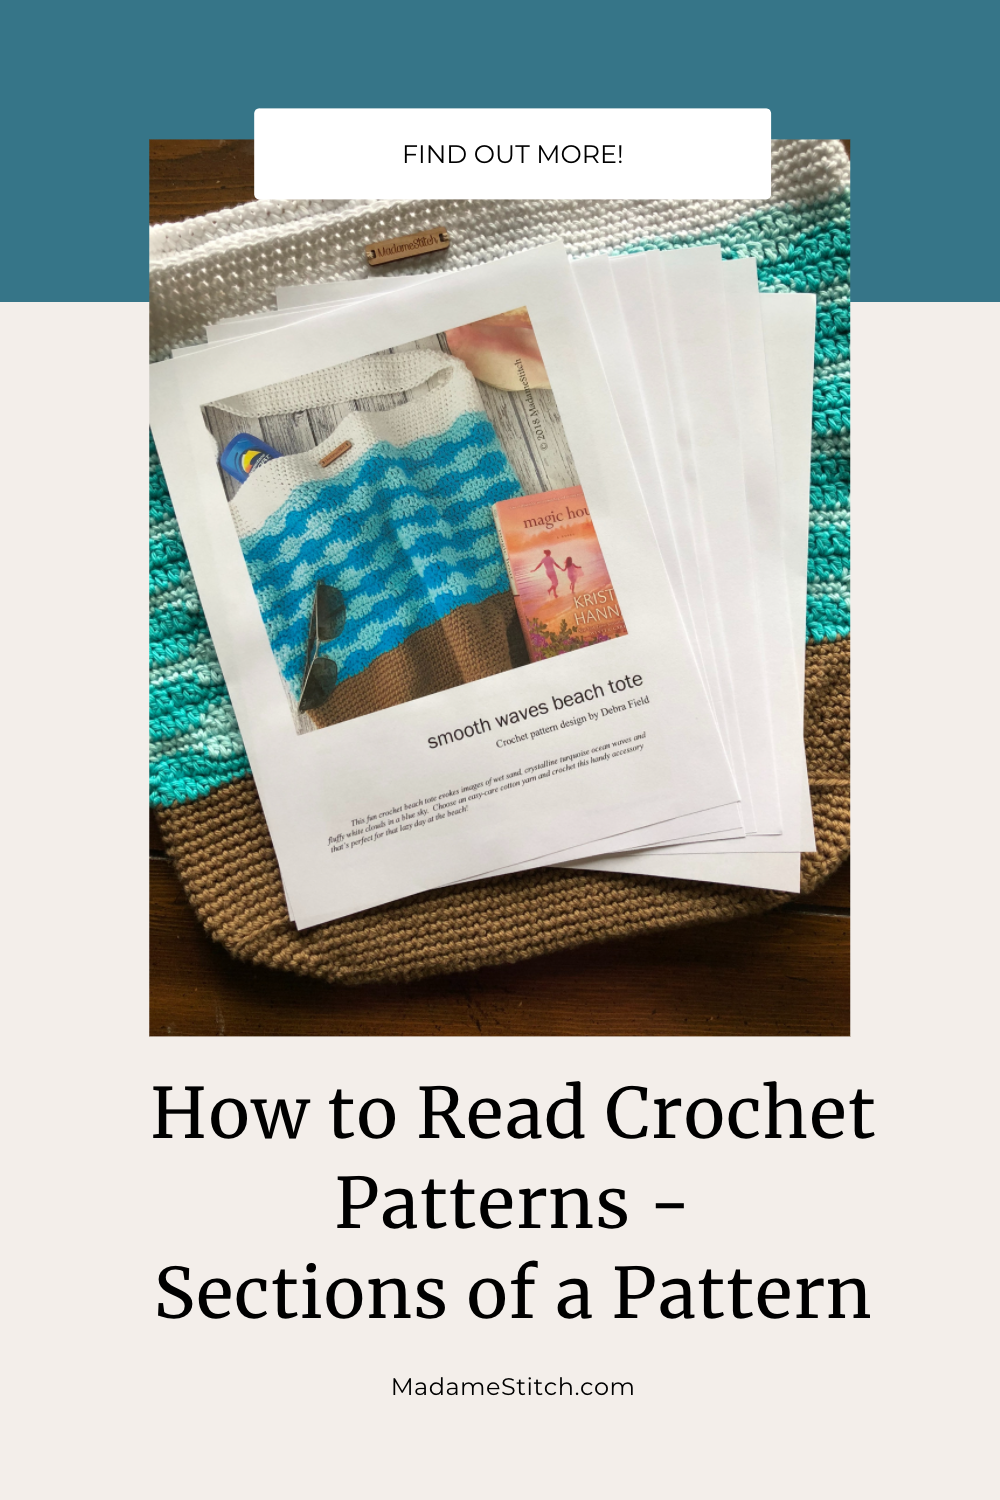 How to Read Crochet Patterns | the sections of a pattern